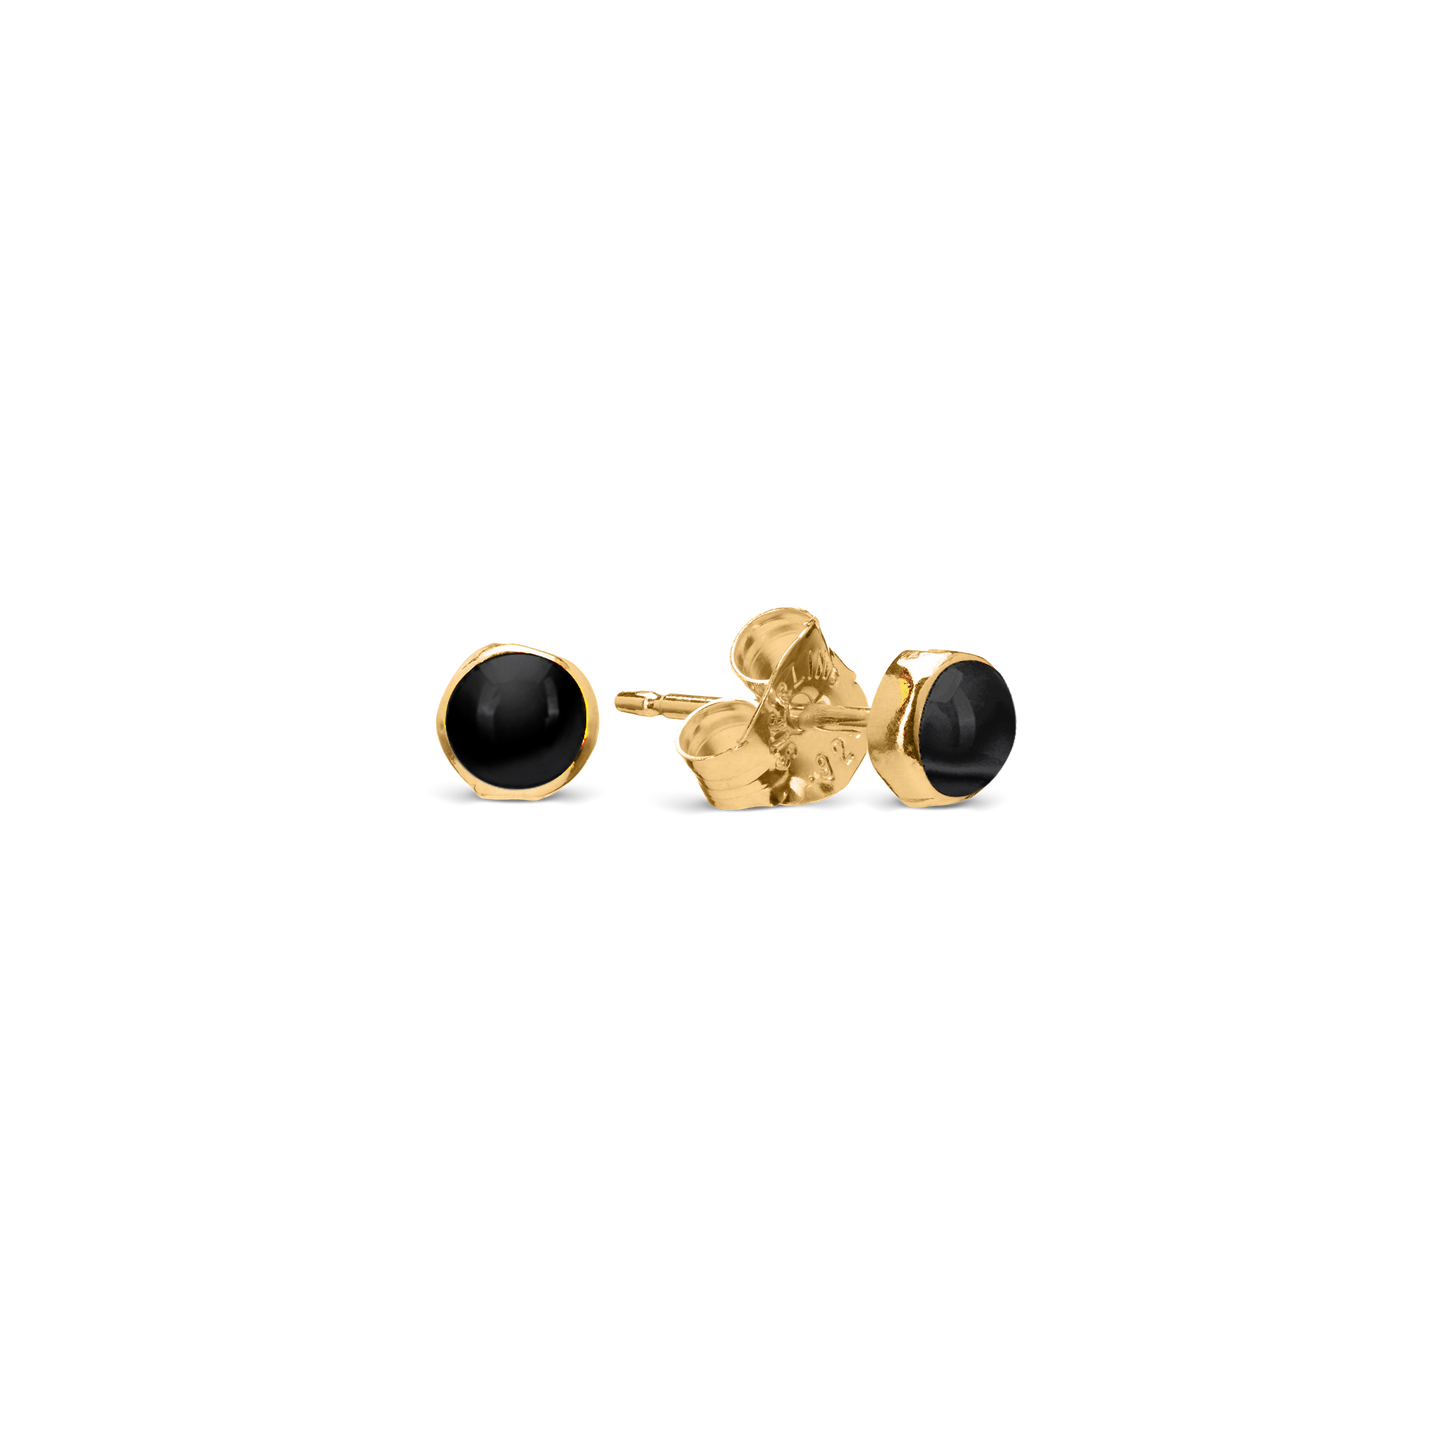 THE PERFECT STUD in 14k gold vermeil